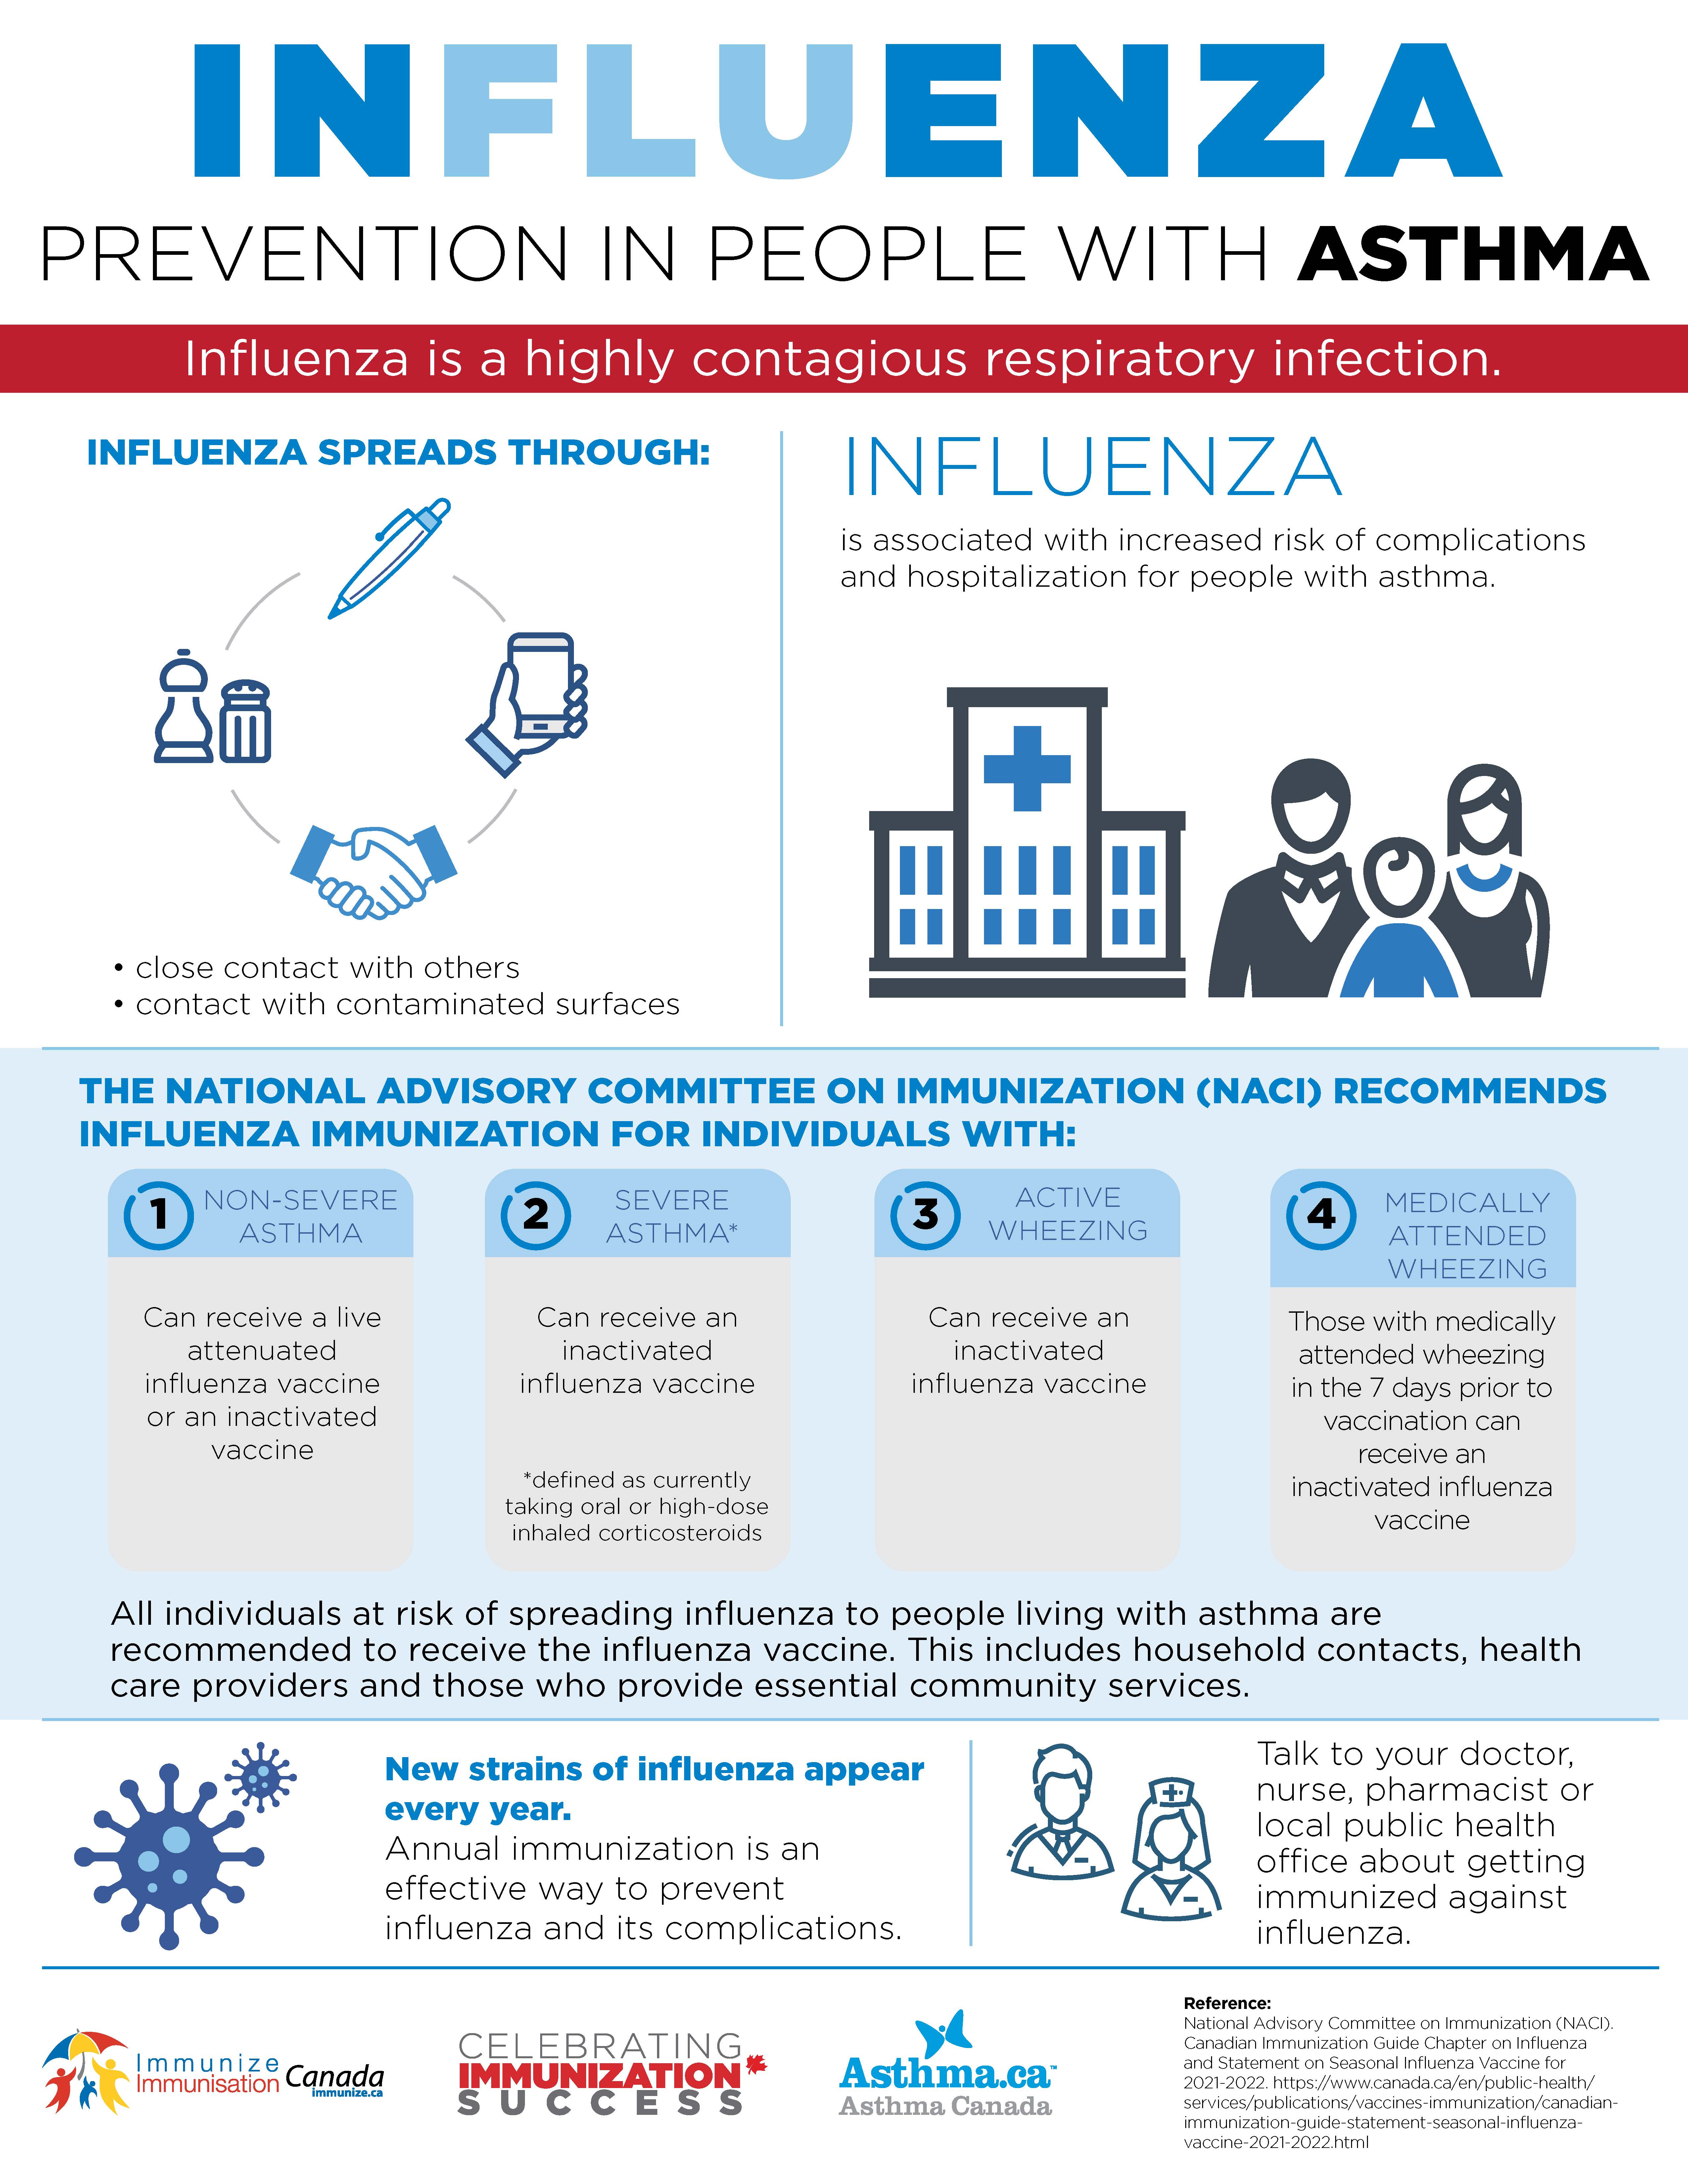 Influenza prevention in people with asthma - infographic